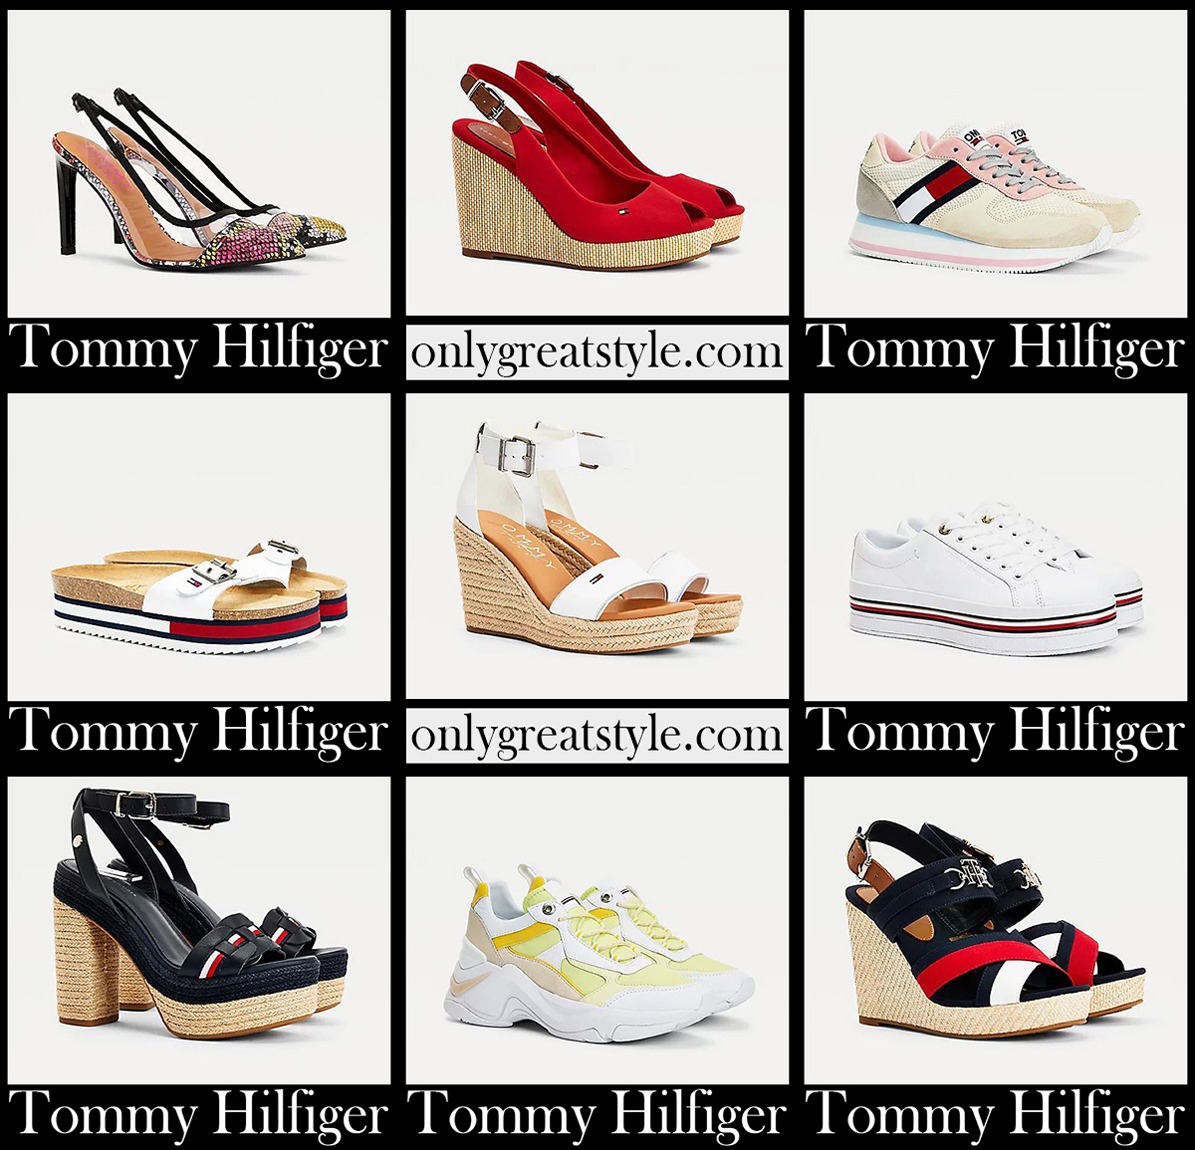 Tommy Hilfiger shoes 2021 new arrivals womens footwear